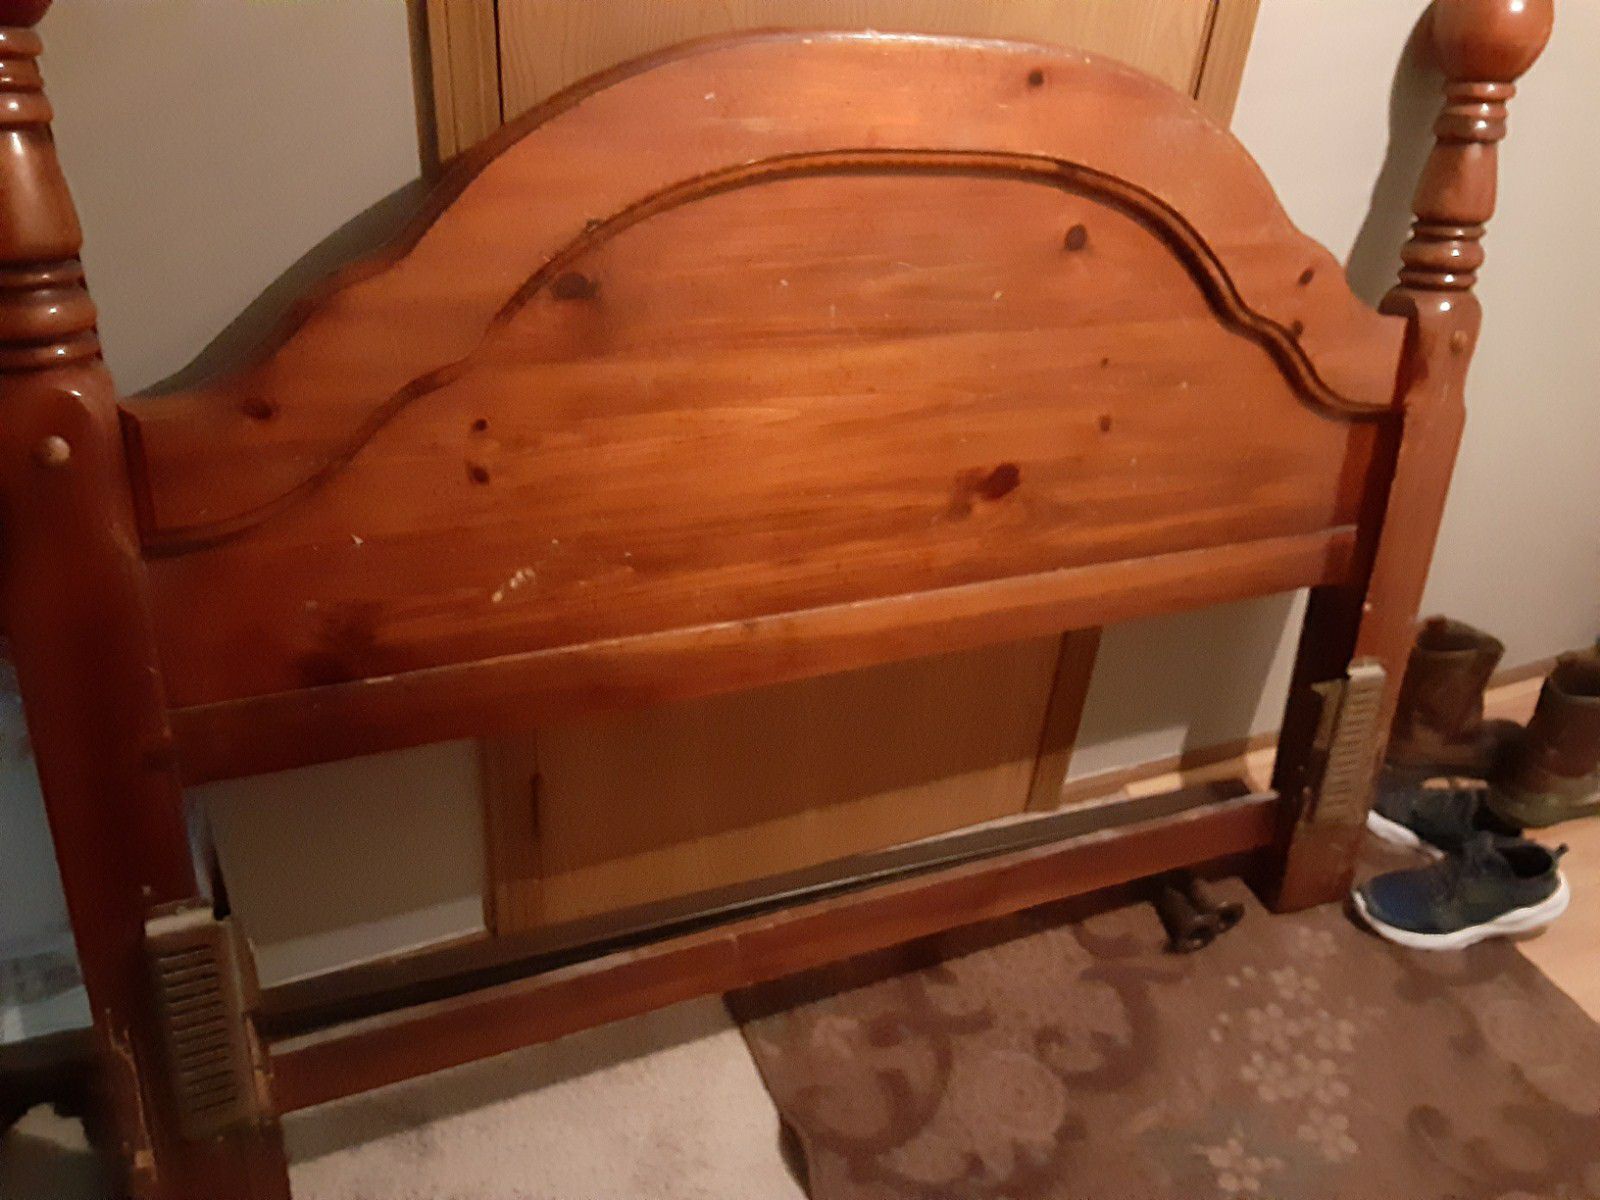 Headboard and metal frame full or queen bed frame adjustable